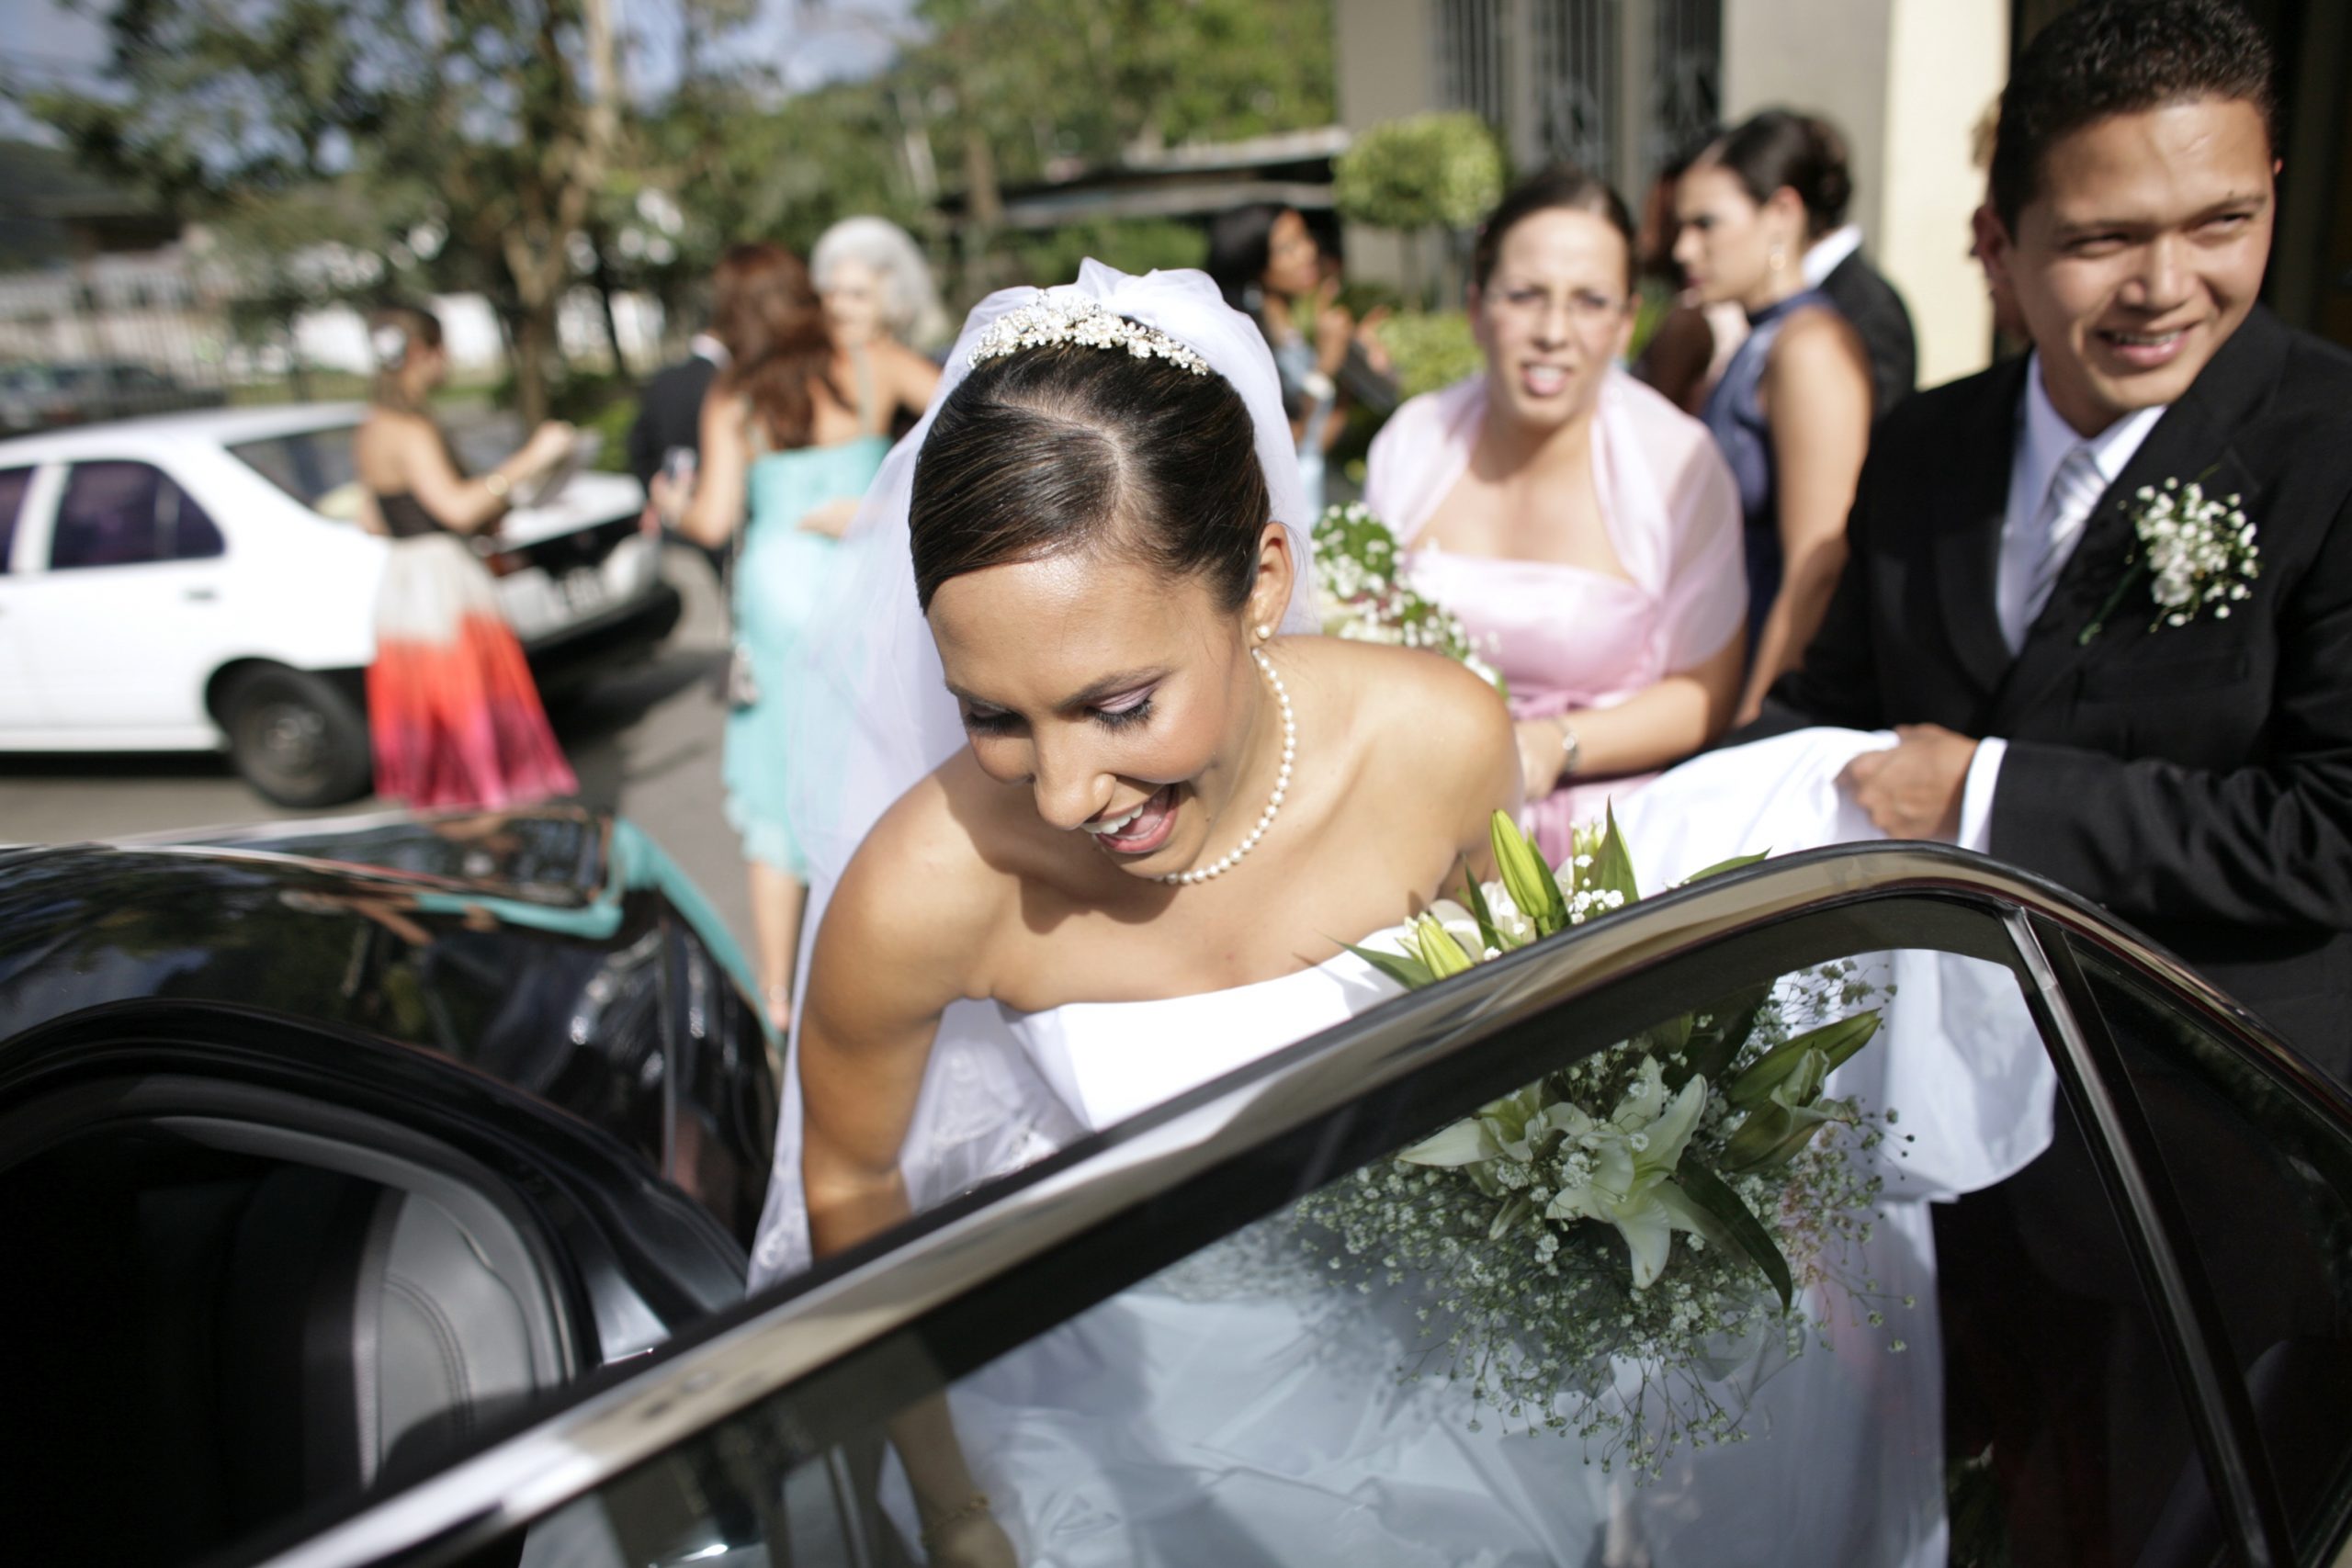 Bride and groom getting into car